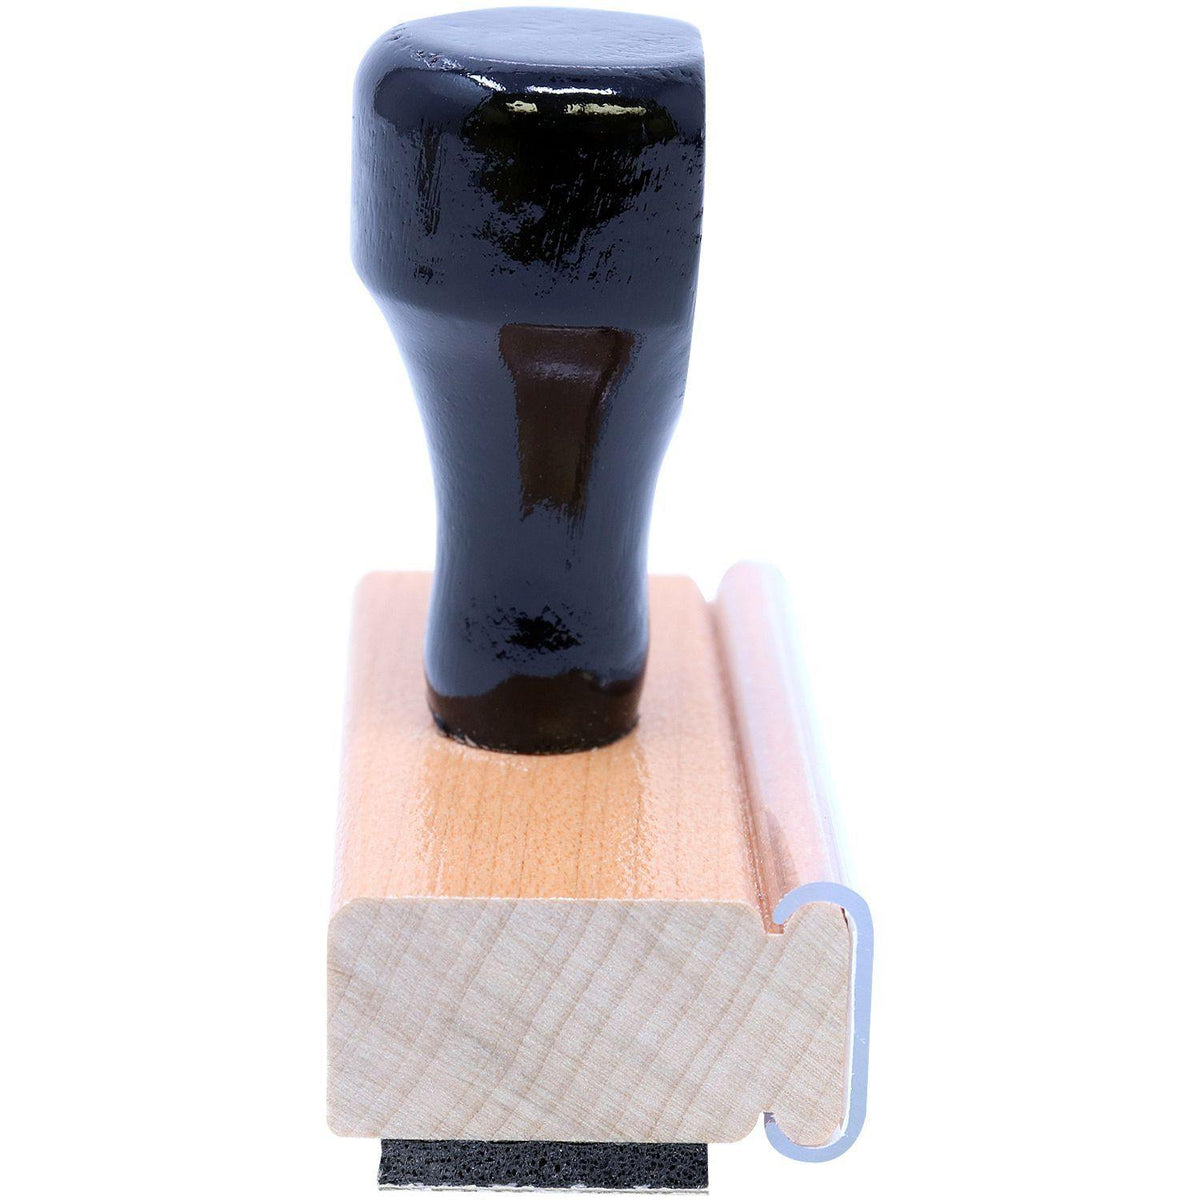 Large Wrong Bank Rubber Stamp - Engineer Seal Stamps - Brand_Acorn, Impression Size_Large, Stamp Type_Regular Stamp, Type of Use_Teacher